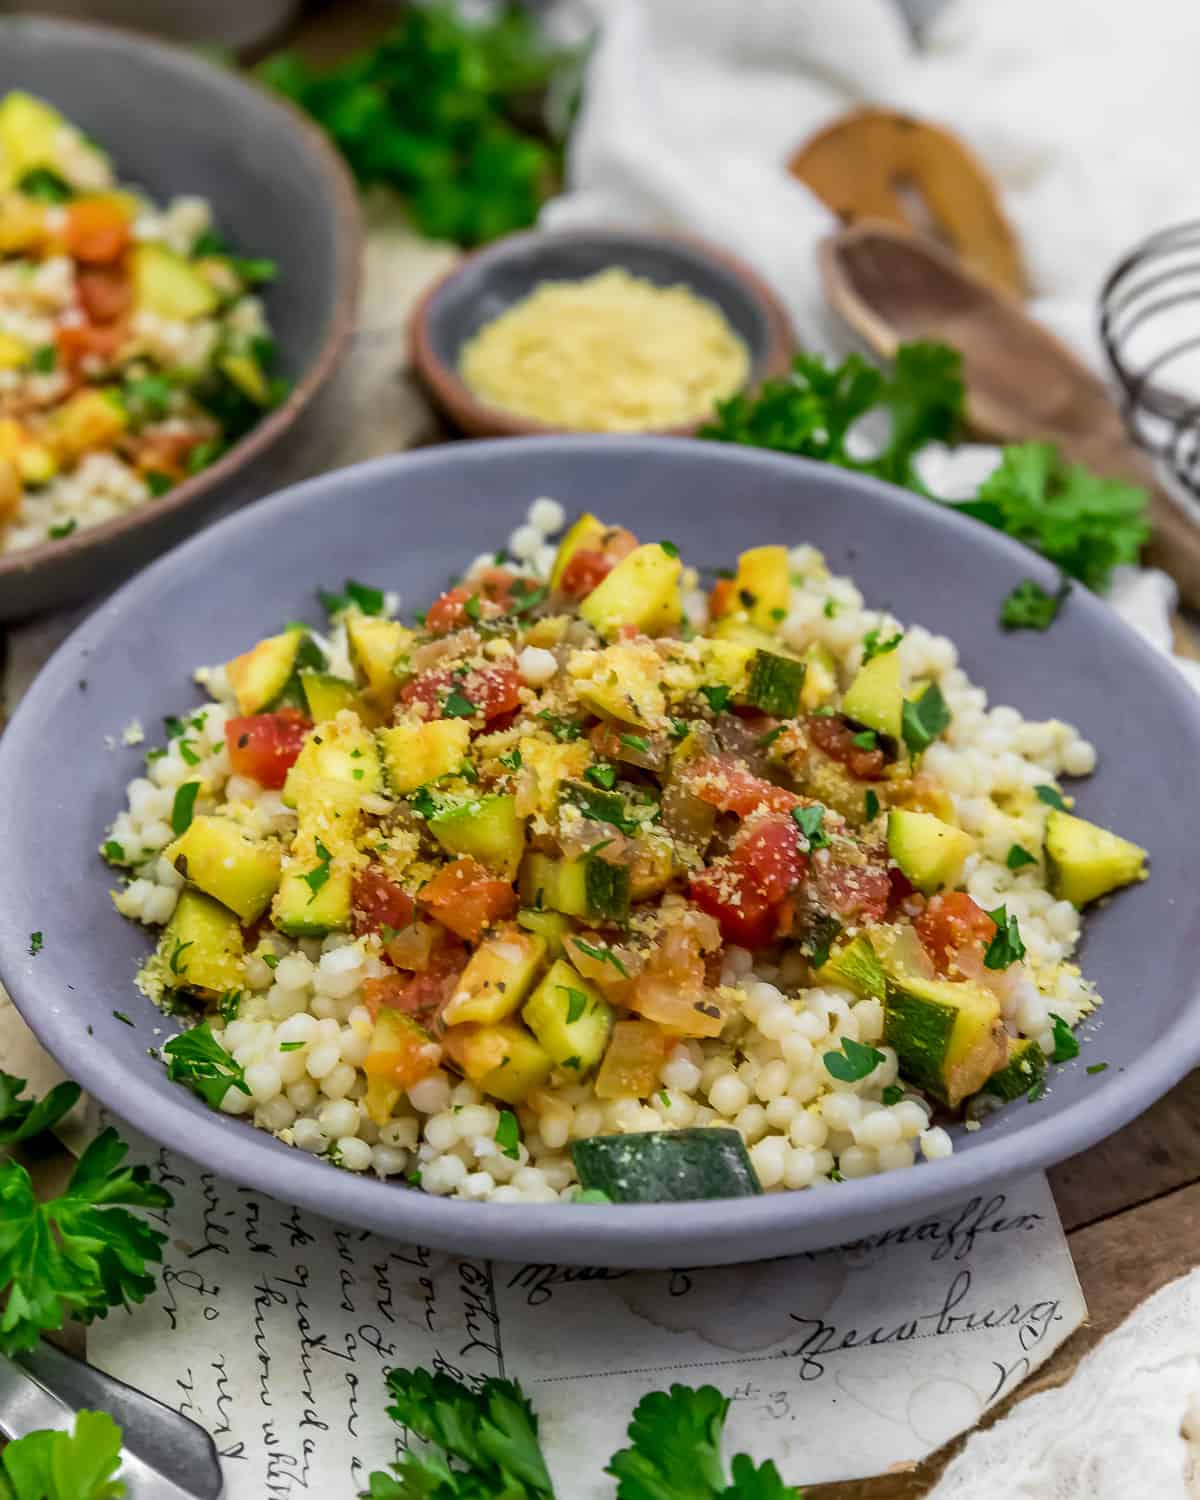 Easy Zucchini Tomato Onion Skillet over cous cous